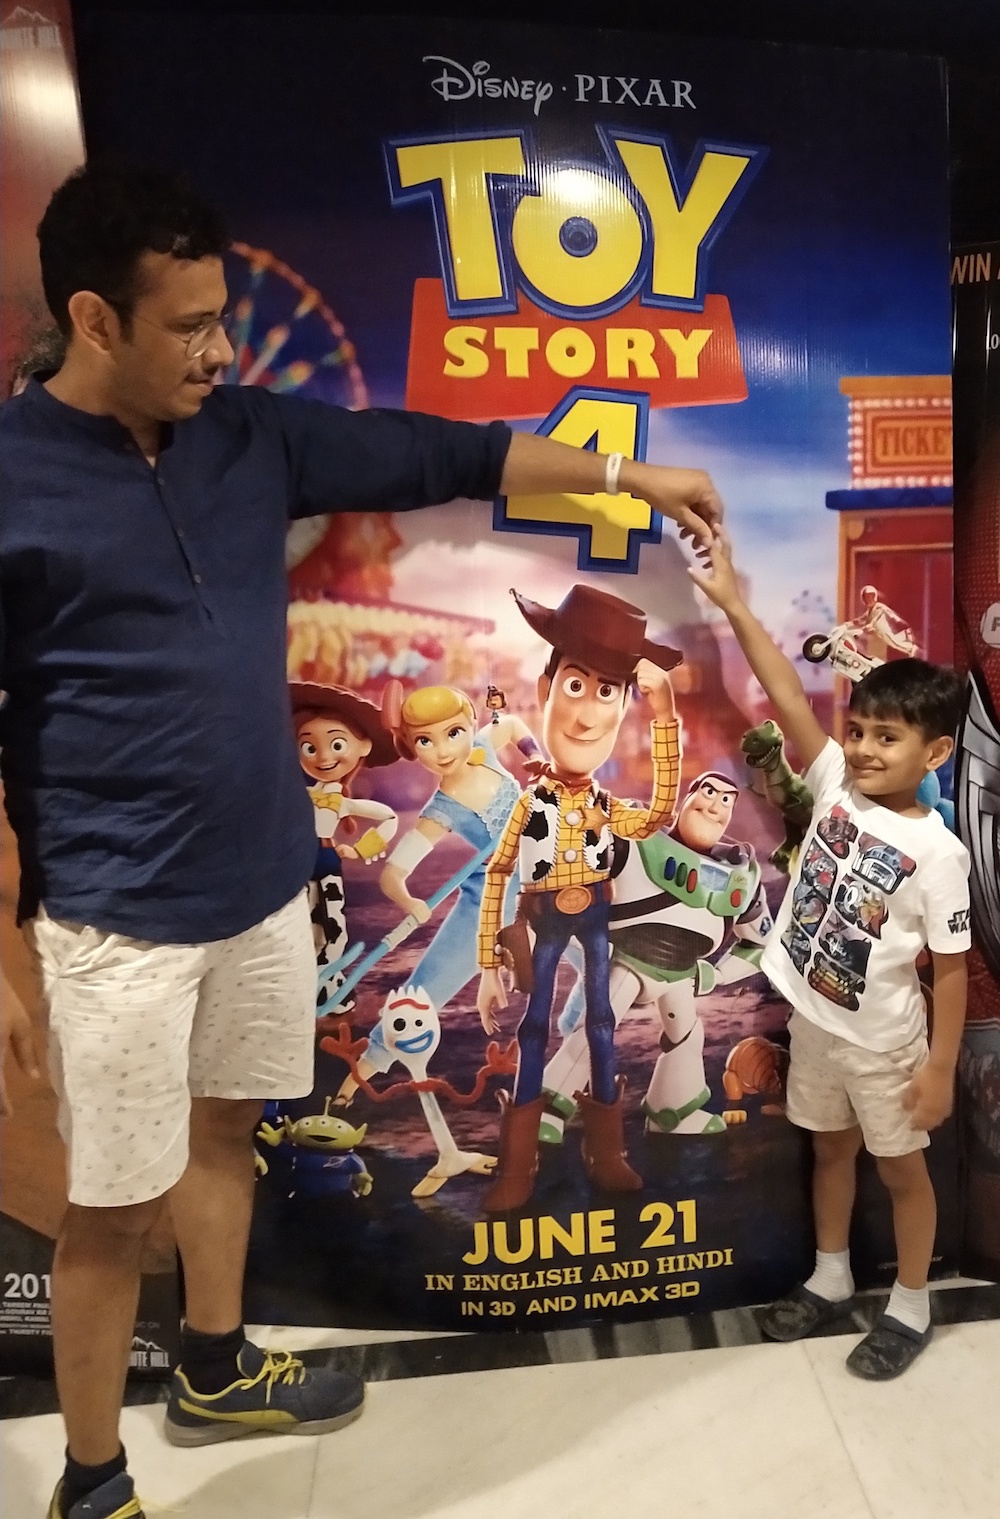 Read out Movie Review for Toy Story 4 . With Brilliant animations, amazing storyline and lots of values to teach, Toy Story 4 is more than brilliant coming out right from the Disney and Pixar Studios. #disney #pixar #toystory #toystory4 #moviereview #animatedmovie #movies #kidsmovie